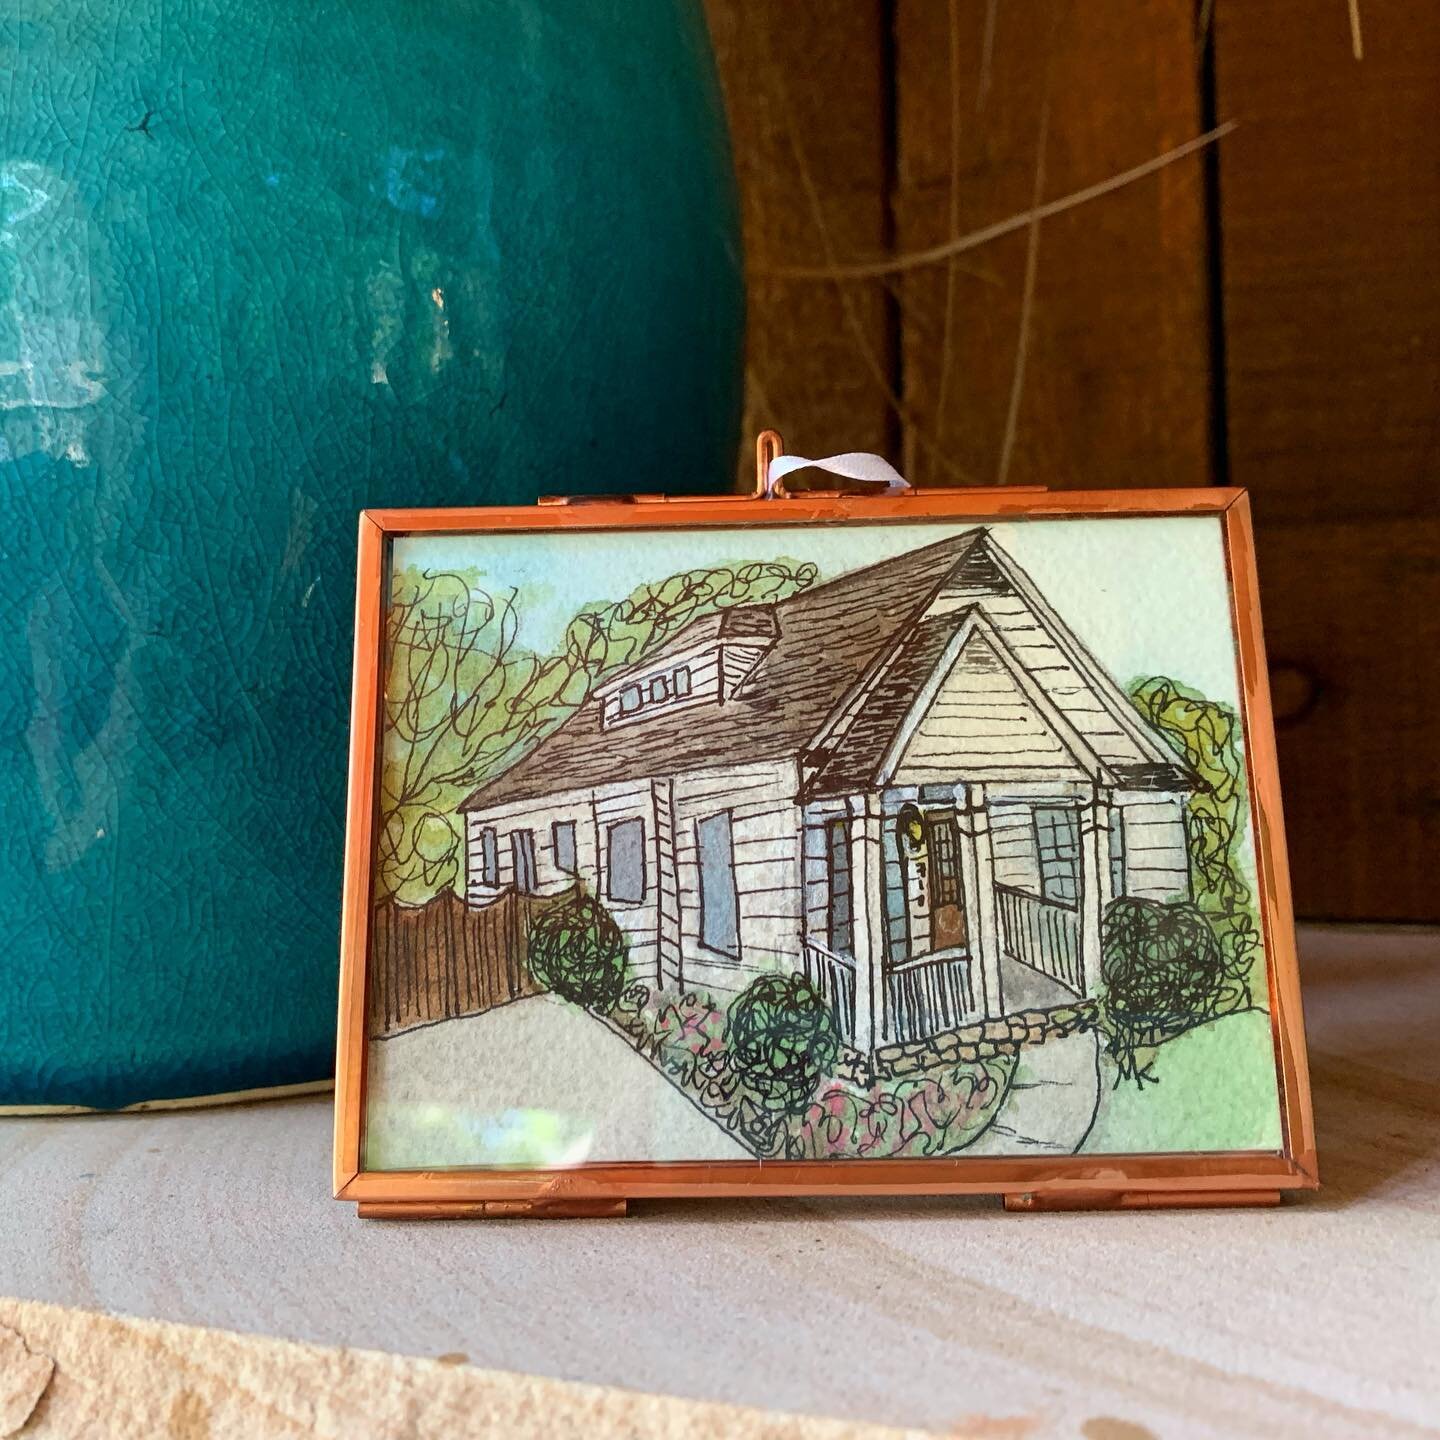 This rainy Monday has me wanting to stay cozy at home. Who&rsquo;s with me? #minihouseportrait #realtorgifts #houseportrait #watercolor #watercolorandink #smallpainting #art #chattanoogaartist #noogamade #custompainting #customart #artgifts